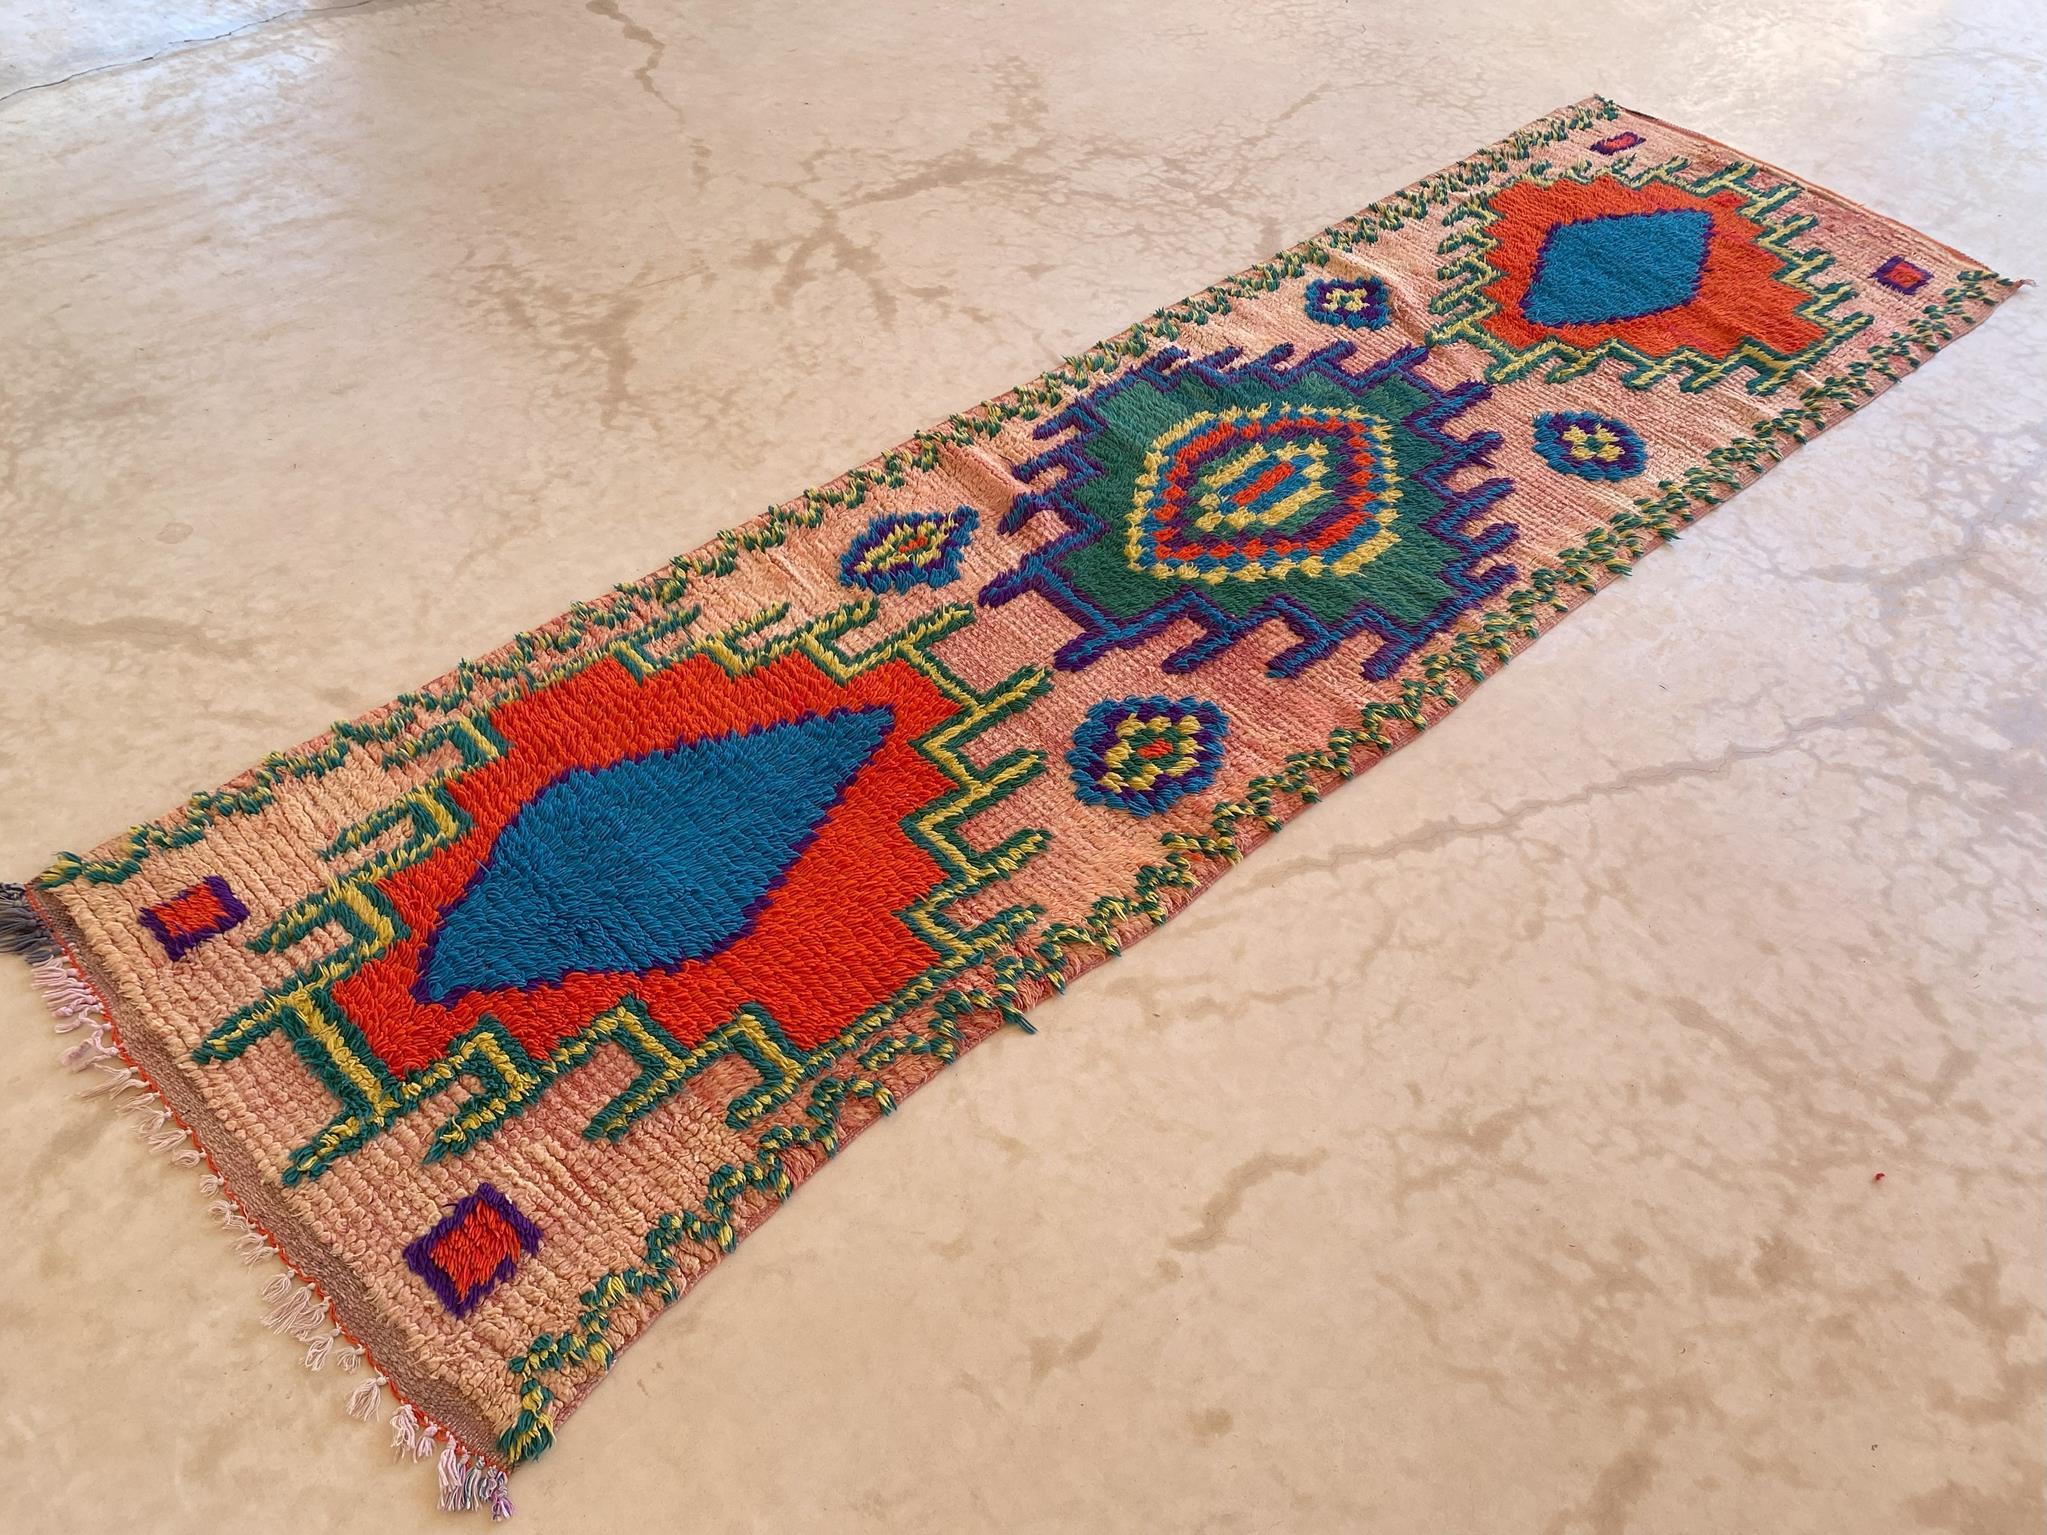 Hand-Woven Vintage Moroccan Boujad rug - Pink/blue/red - 2.8x10.2feet / 87x311cm For Sale